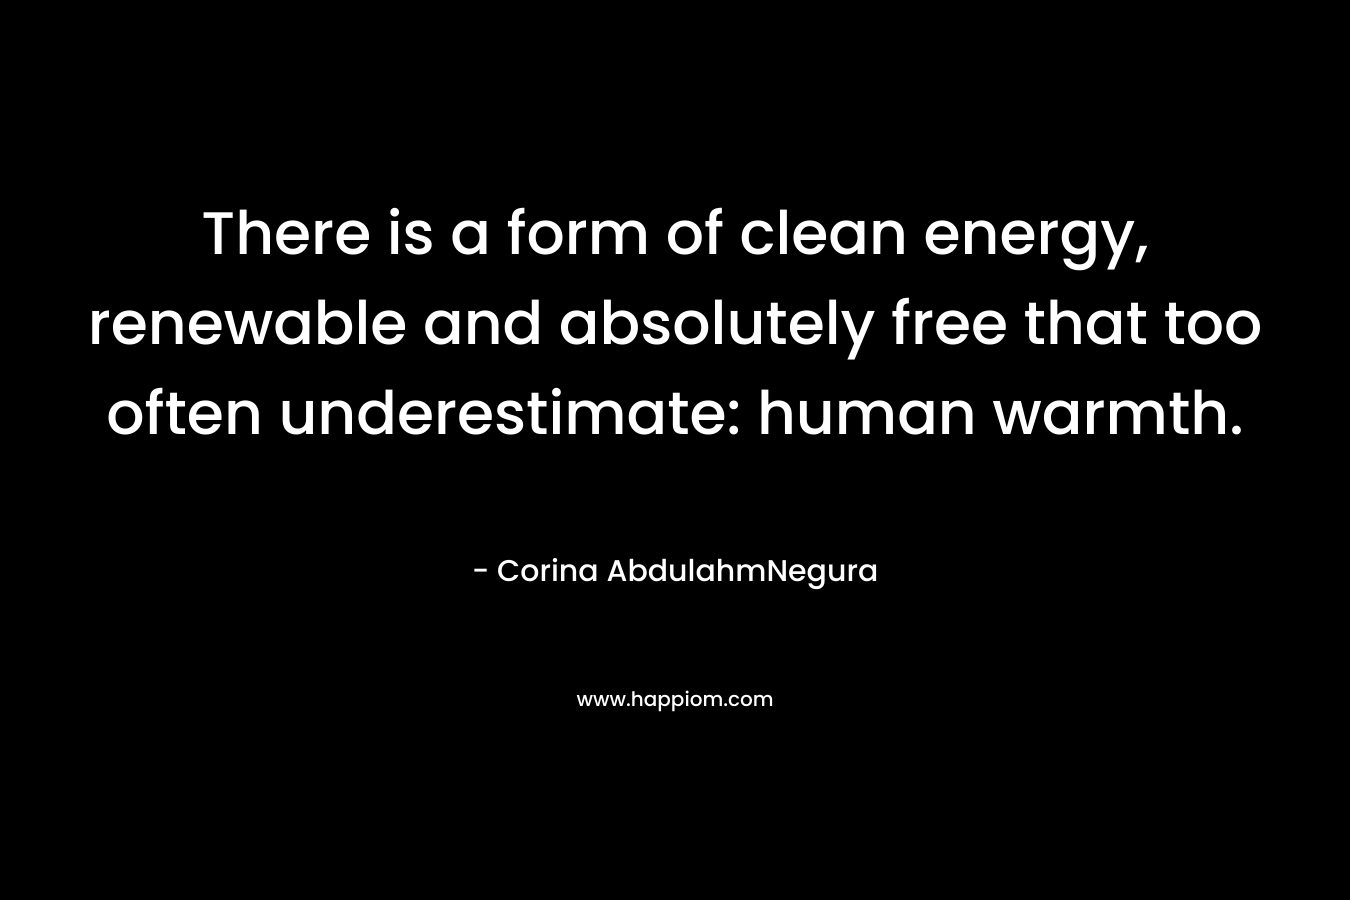 There is a form of clean energy, renewable and absolutely free that too often underestimate: human warmth. – Corina AbdulahmNegura